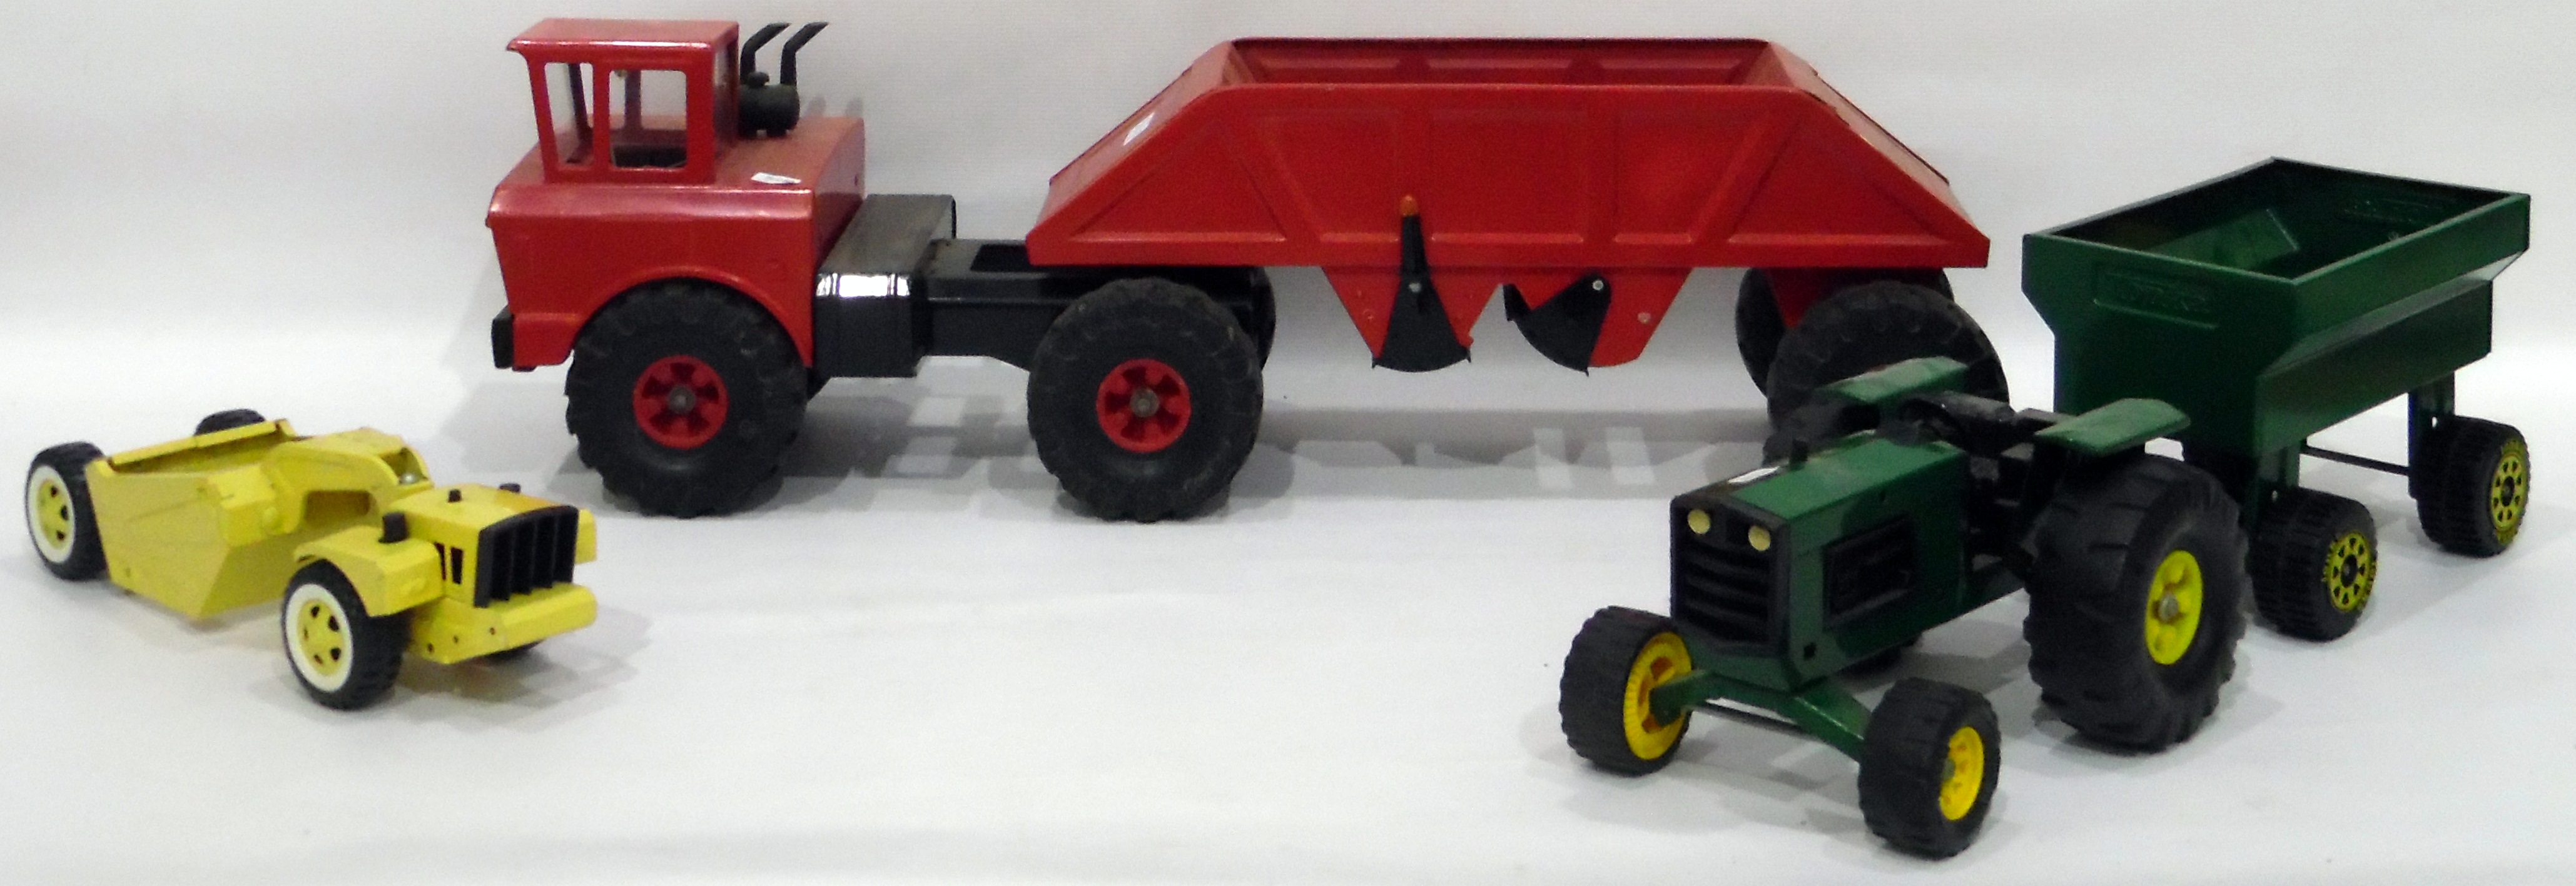 Tonka metal lorry with trailer, - Image 2 of 2